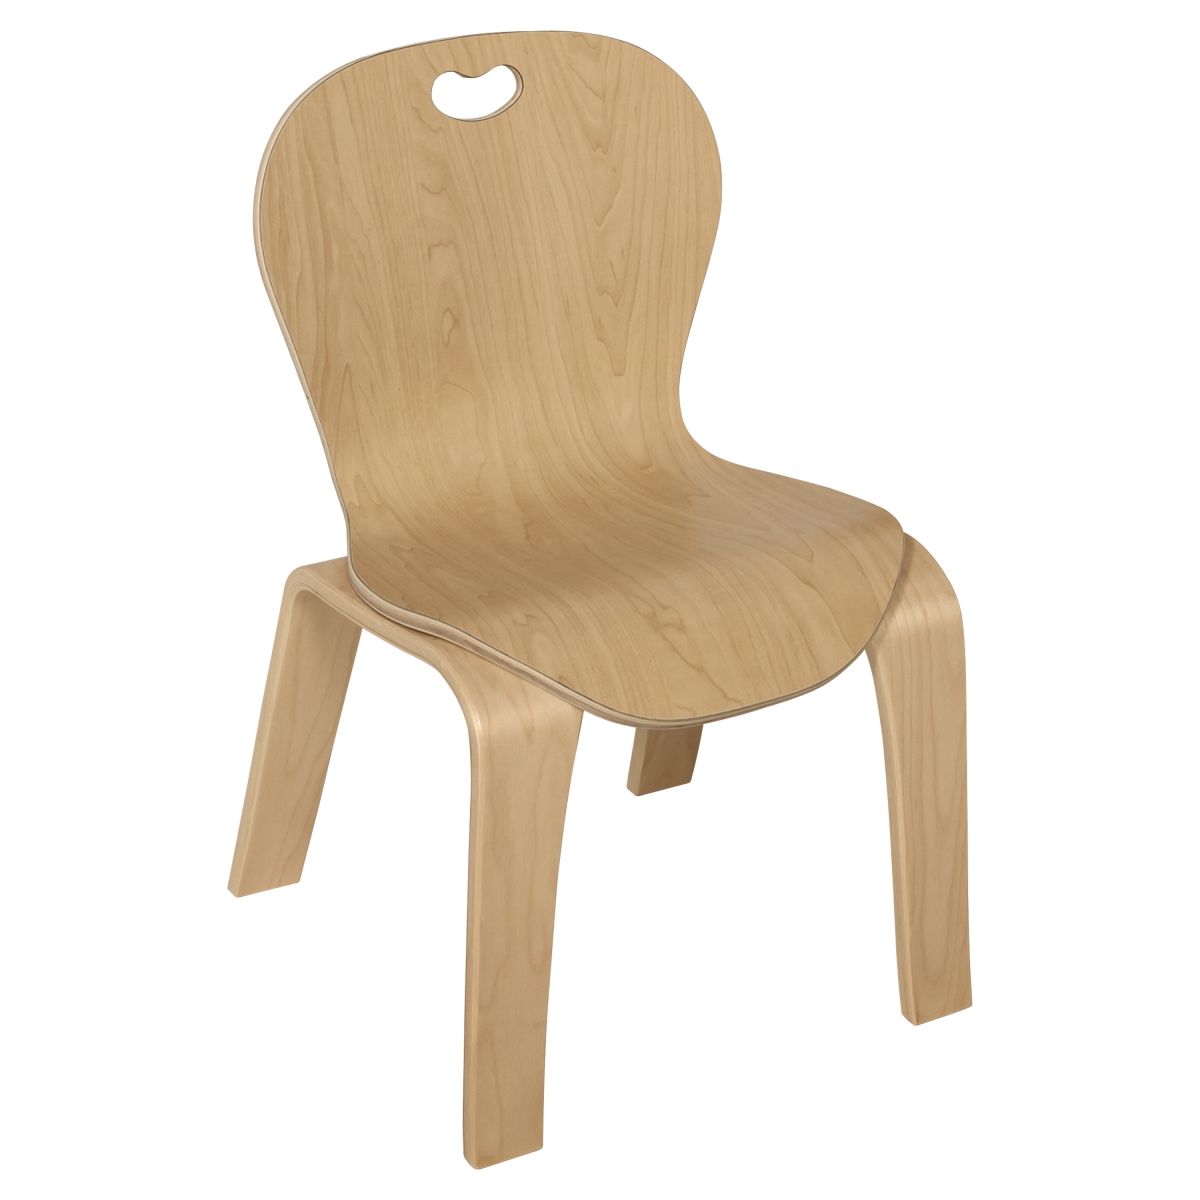 Mh881801 18 In. Bentwood Kids Chair